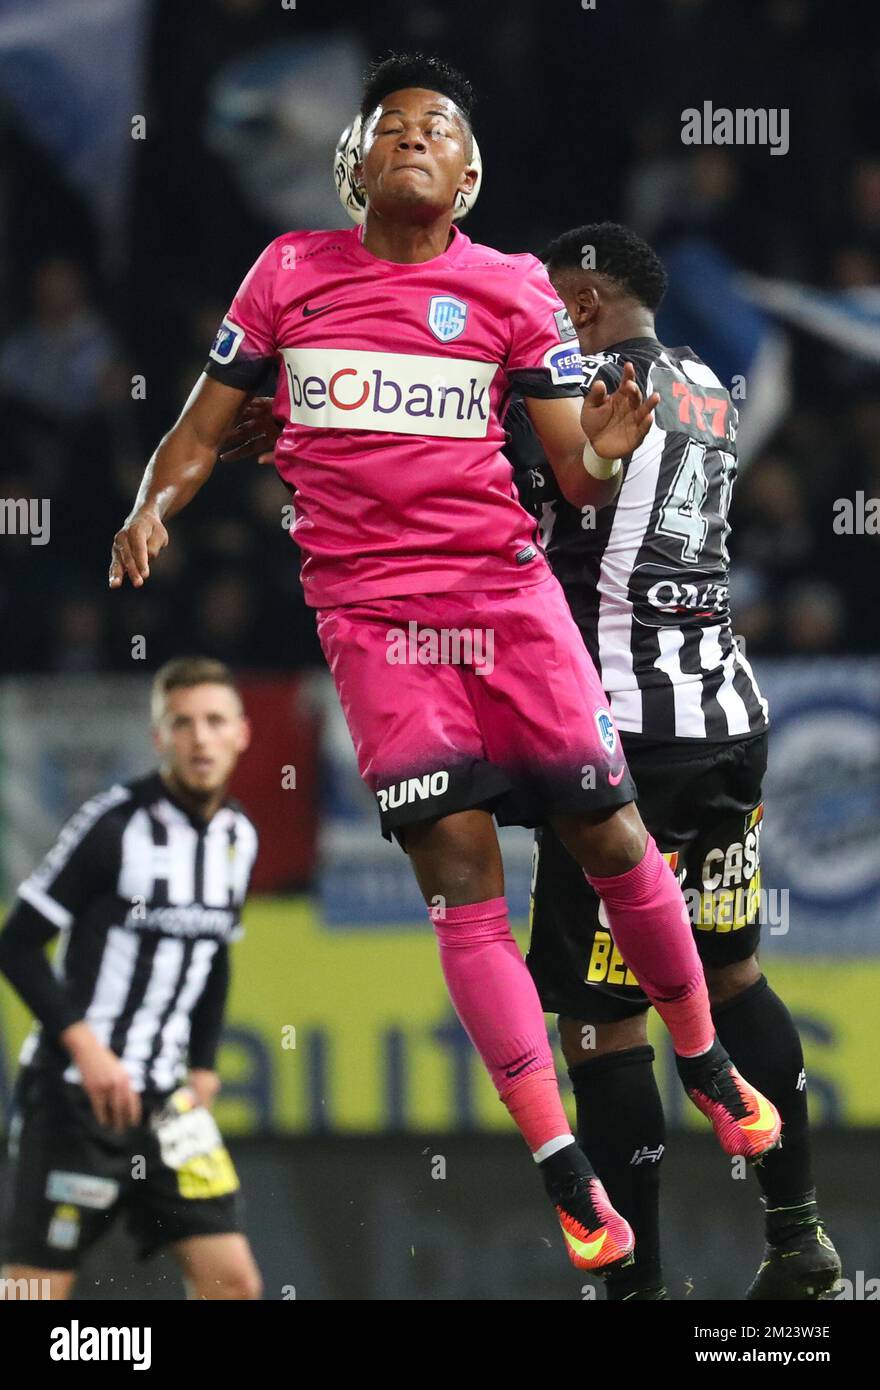 Genk's Leon Bailey and Charleroi's Francis N'Ganga fight for the ball during a soccer game between Sporting Charleroi and KRC Genk, the quarter-final of Croky Cup competition, Wednesday 14 December 2016